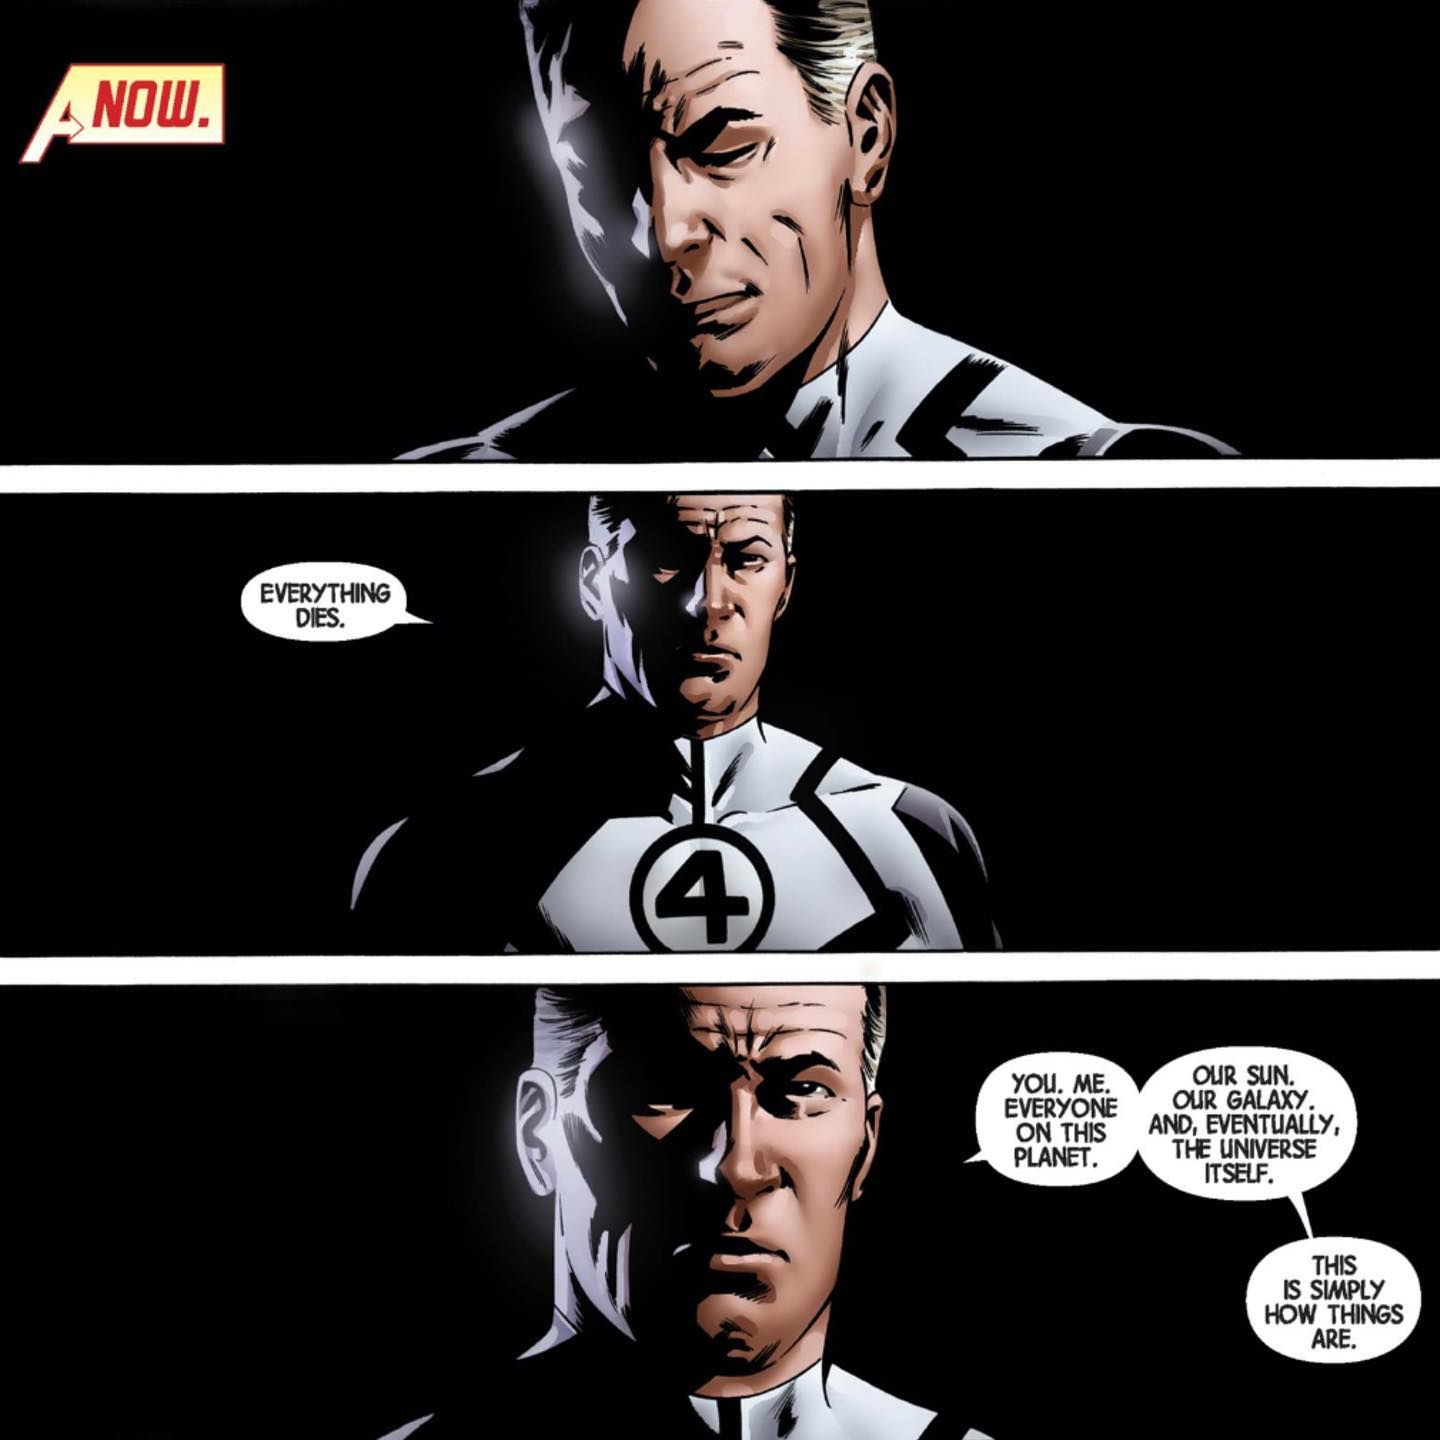 Reed Richards saying that everything dies in New Avengers #1